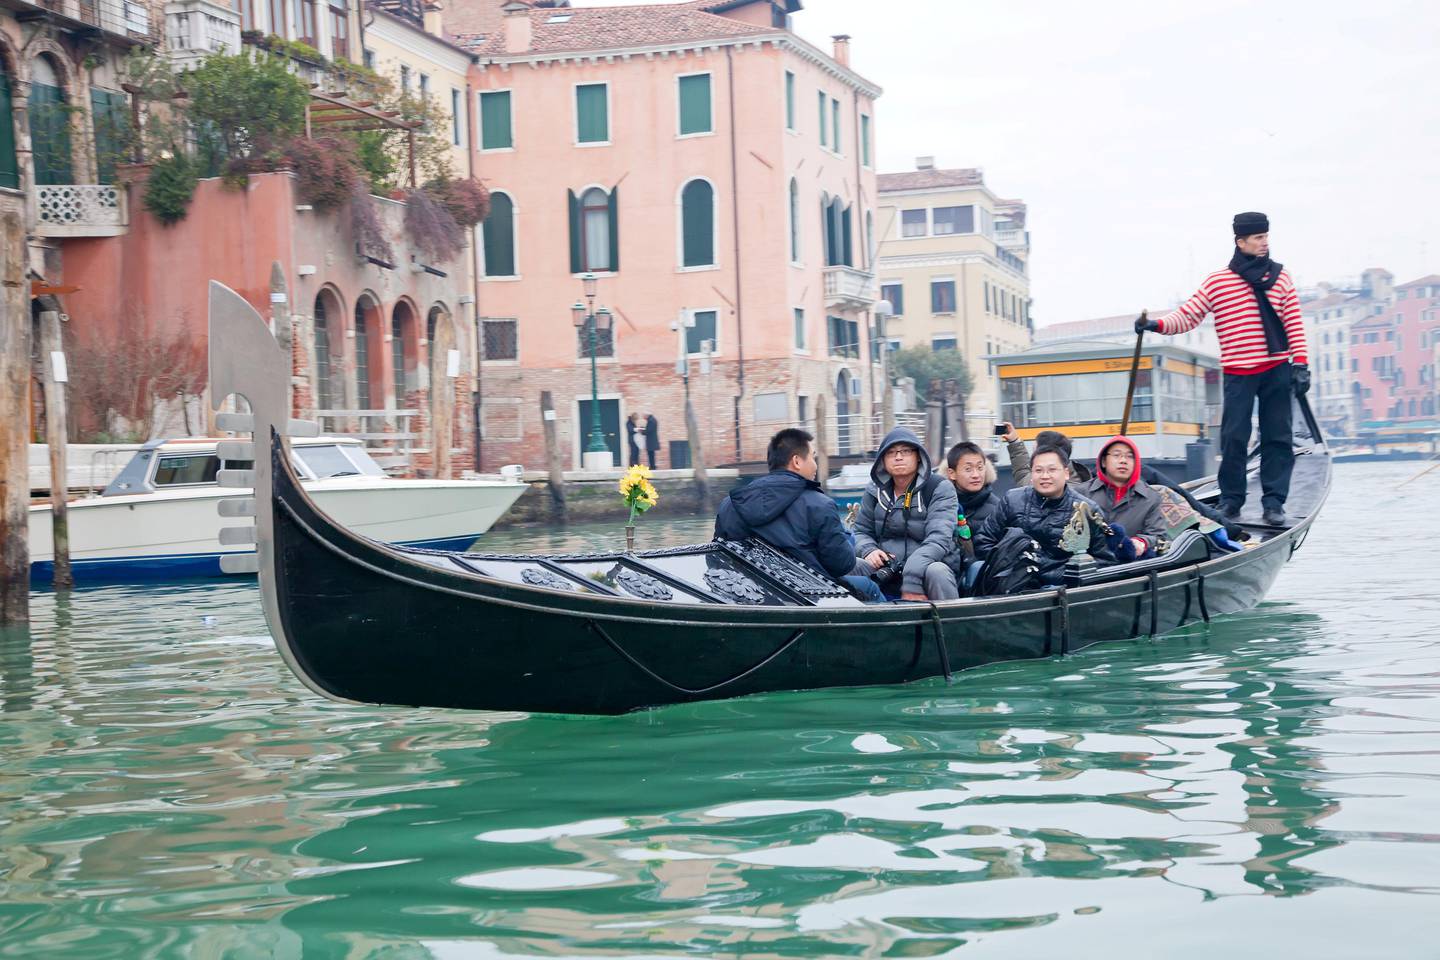 "Venice, Italy, January 1, 2011. Gondolier sailing by Venice Grand channel with chinese tourists on board, in winter."